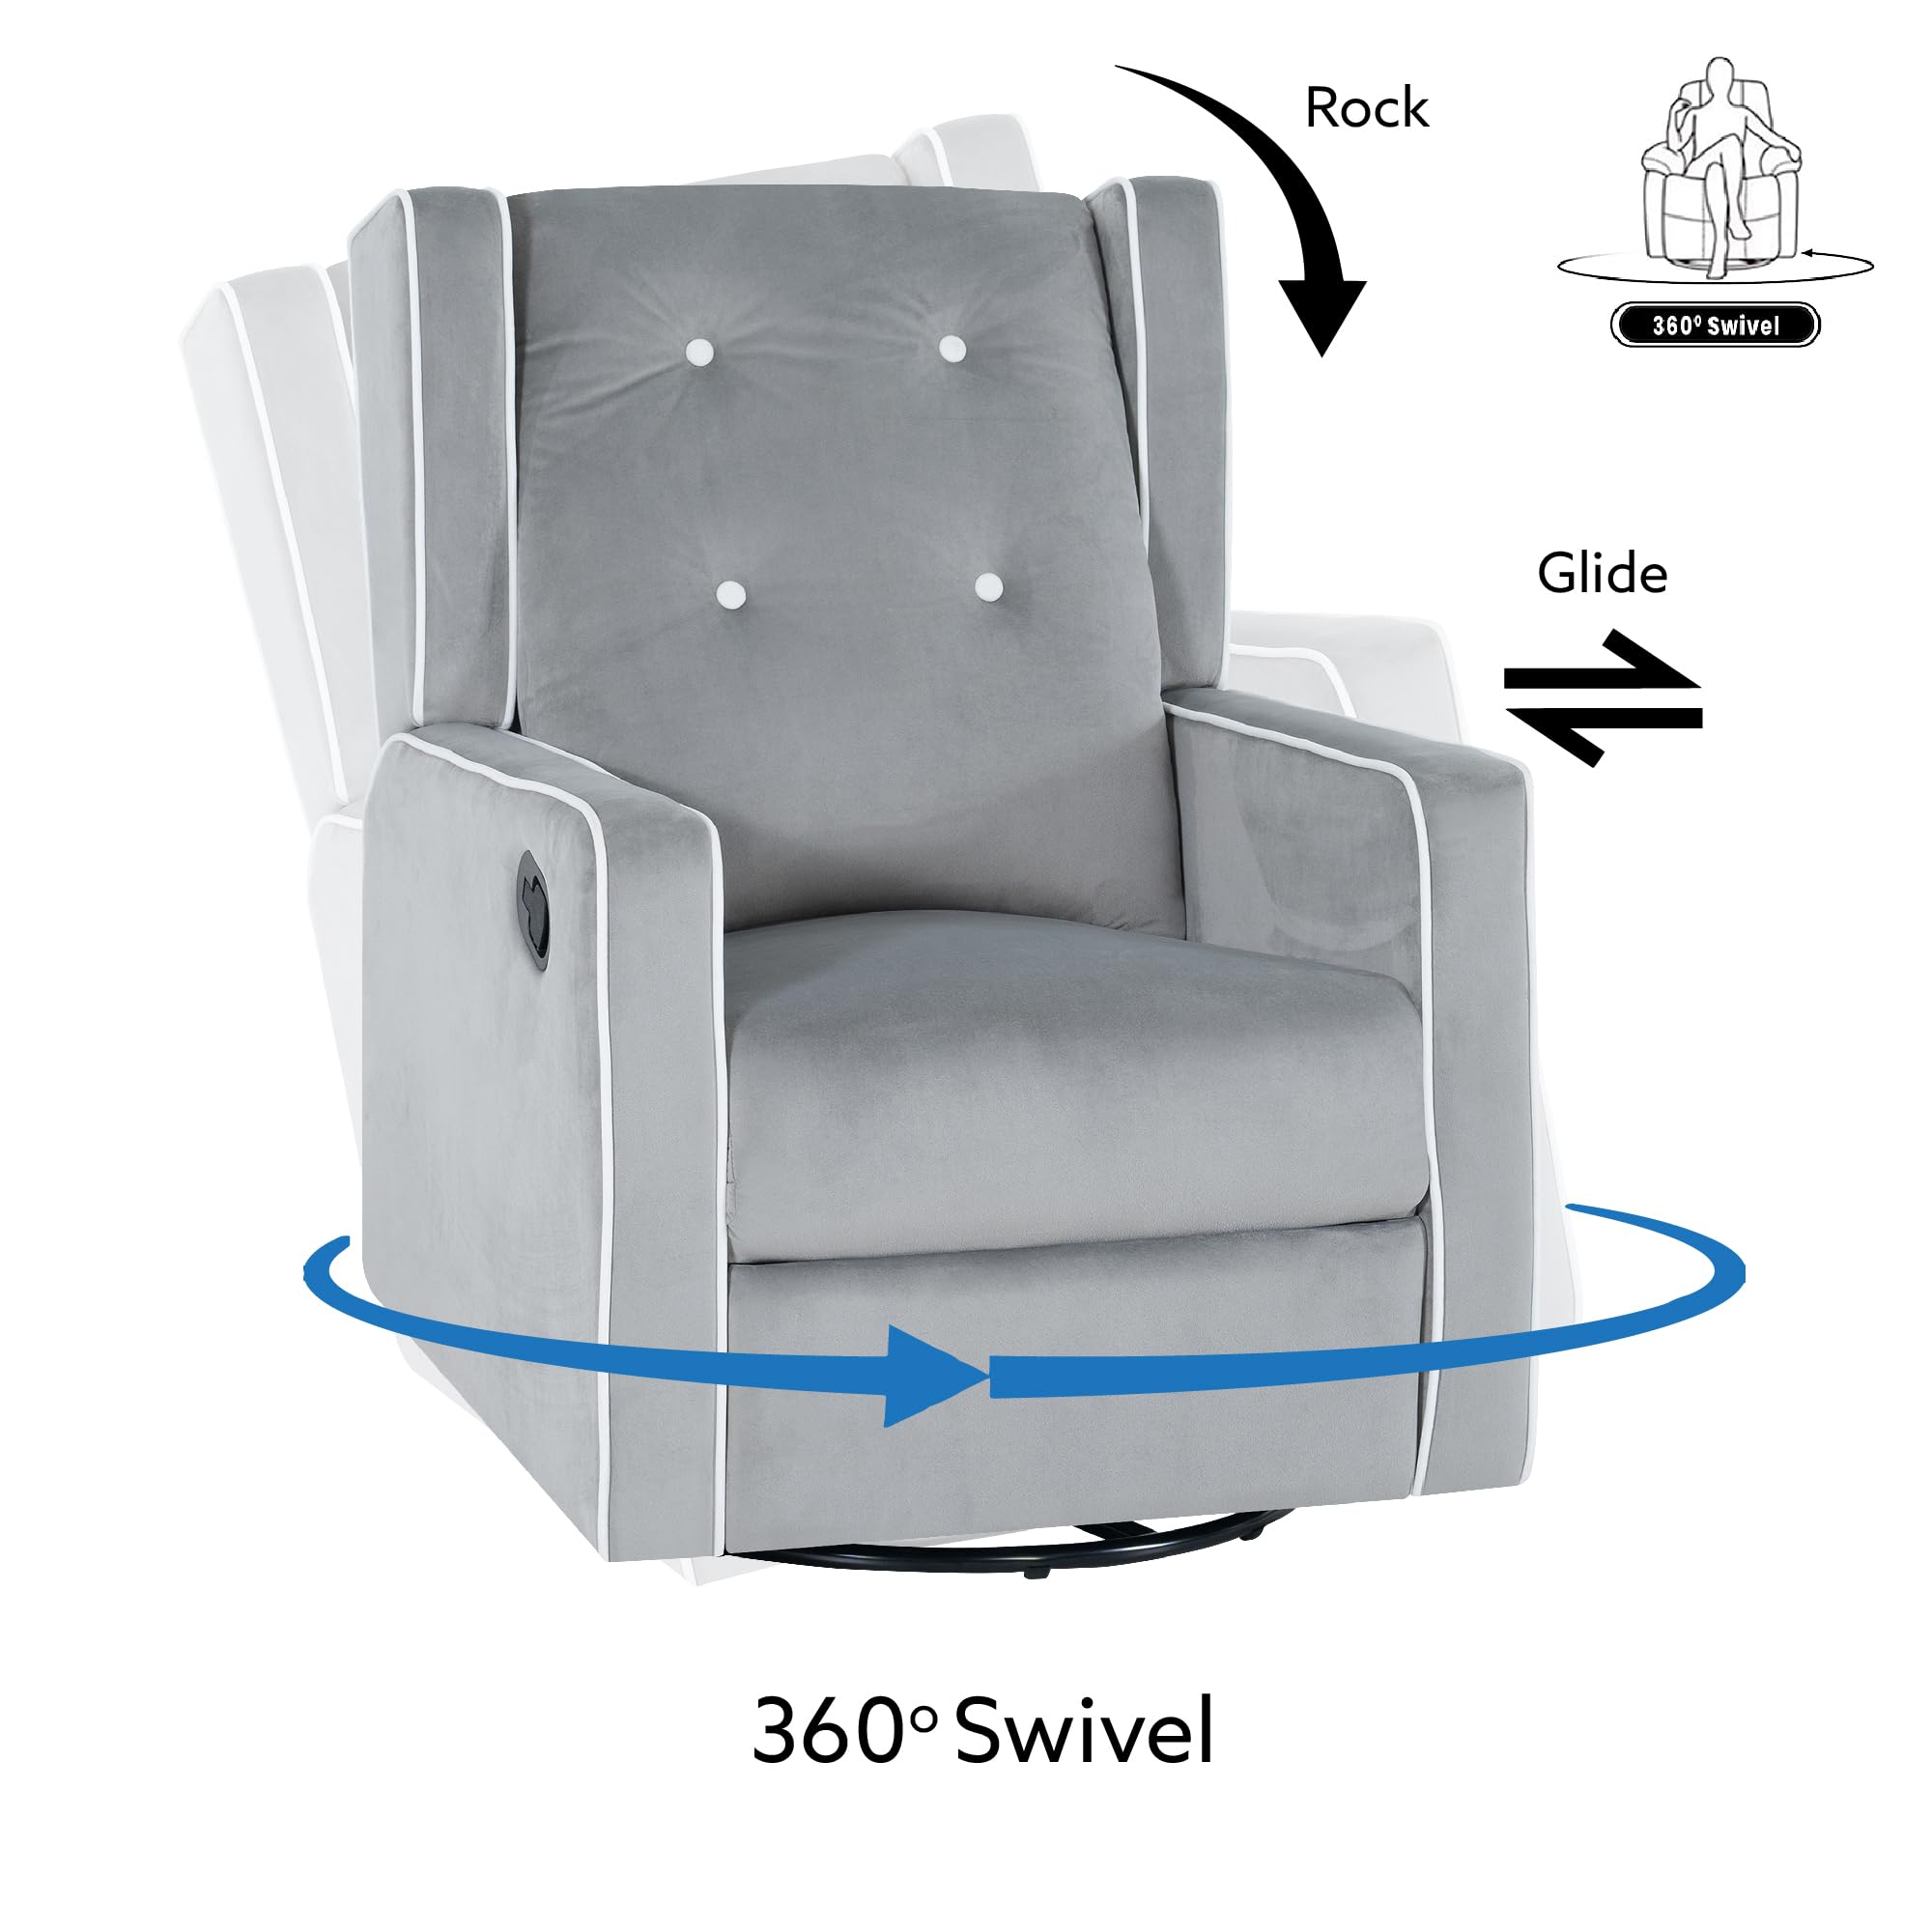 Bond with Your Baby, Relax in Style with Odelia 360° Swivel Glider Rocker Recliner, Nursery Chair with Manual Puller, Plush Cushioning, Soothing Rocking Motion with Microfiber Fabric - Light Gray